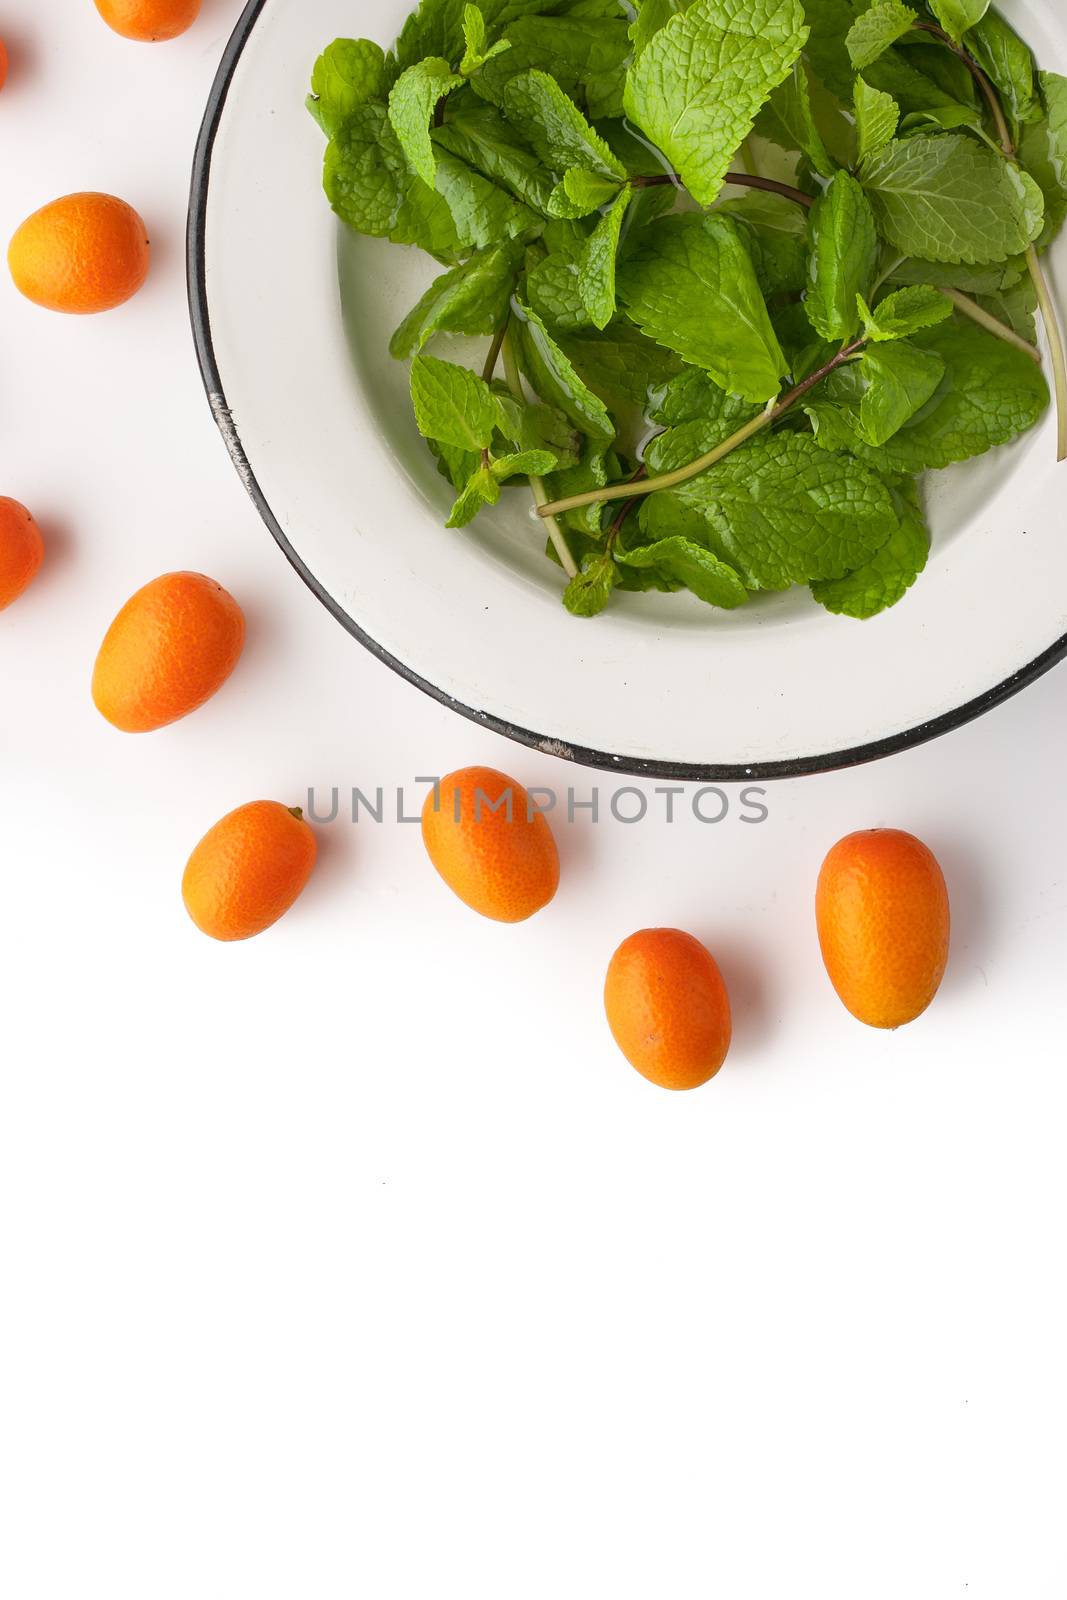 Mint with kumquat on the white background